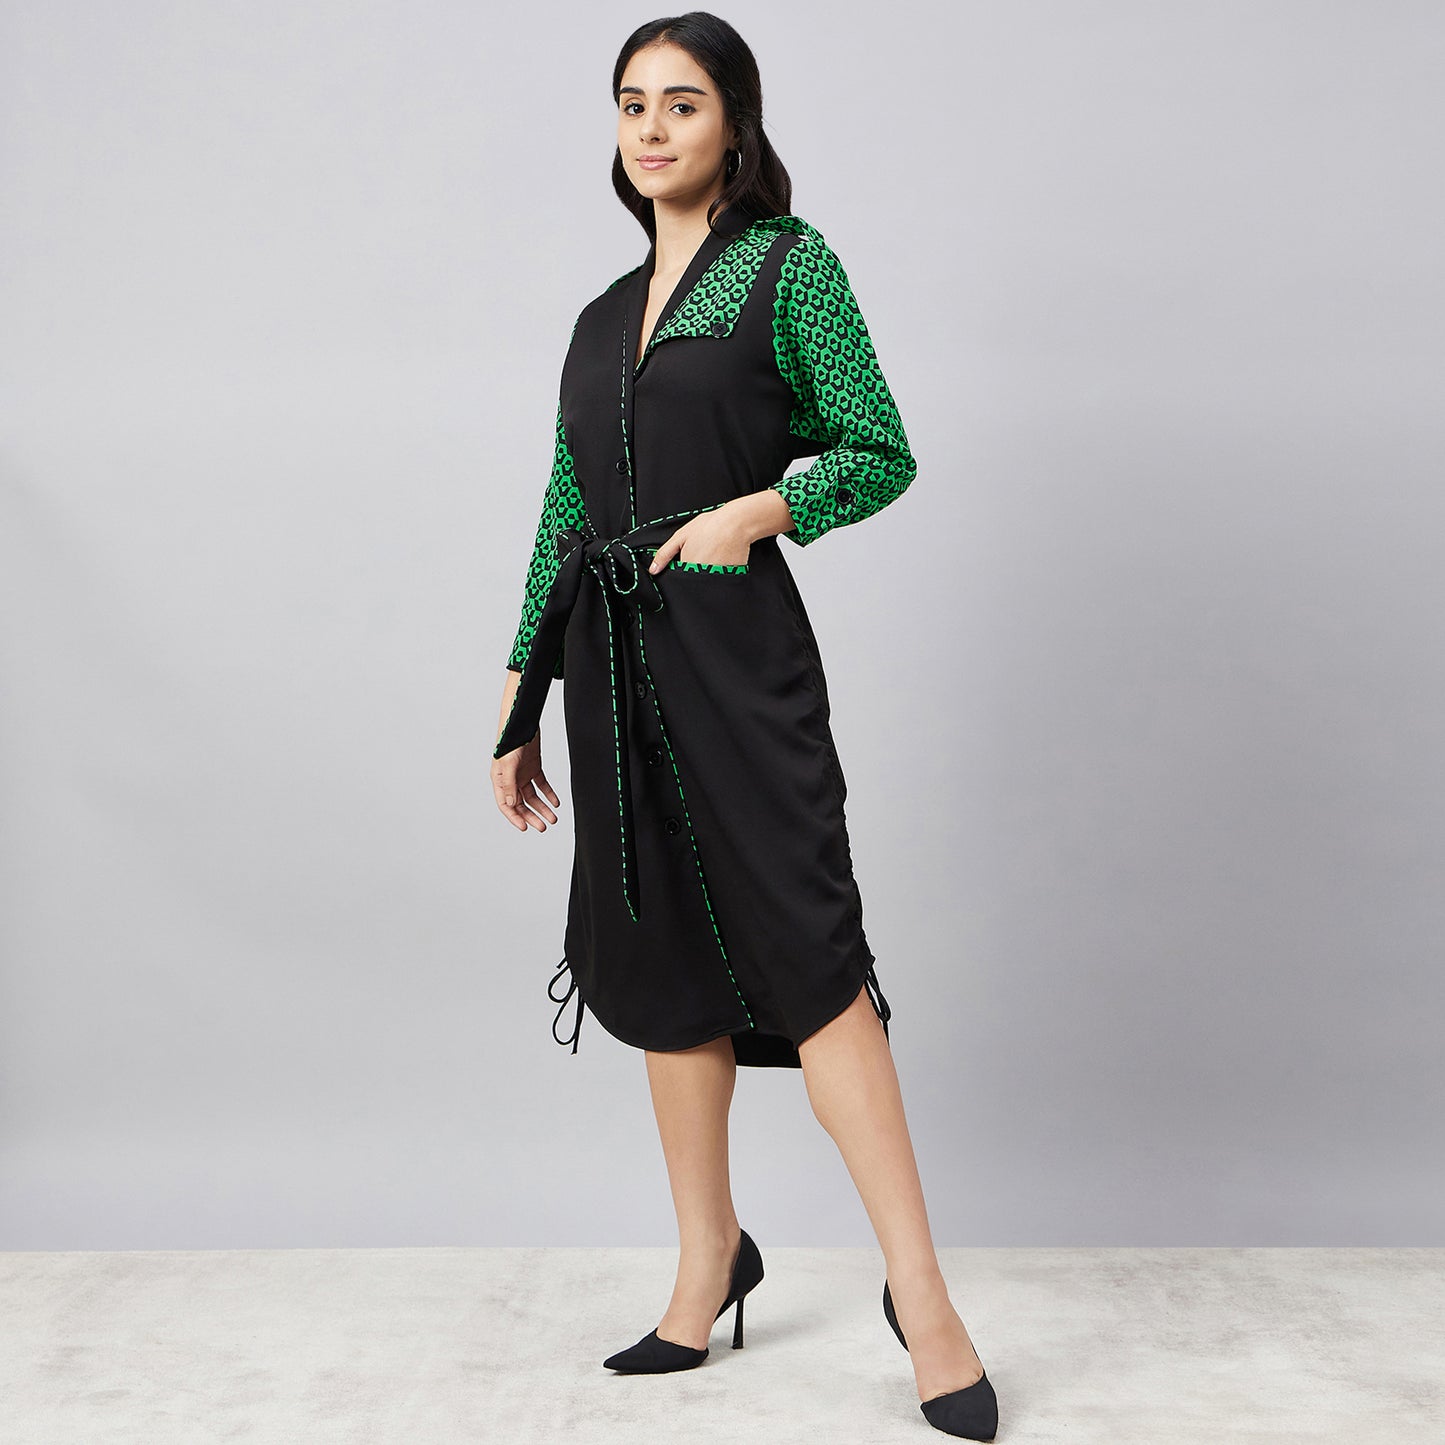 Black and Green Houndstooth Print Shirt Dress with Belt